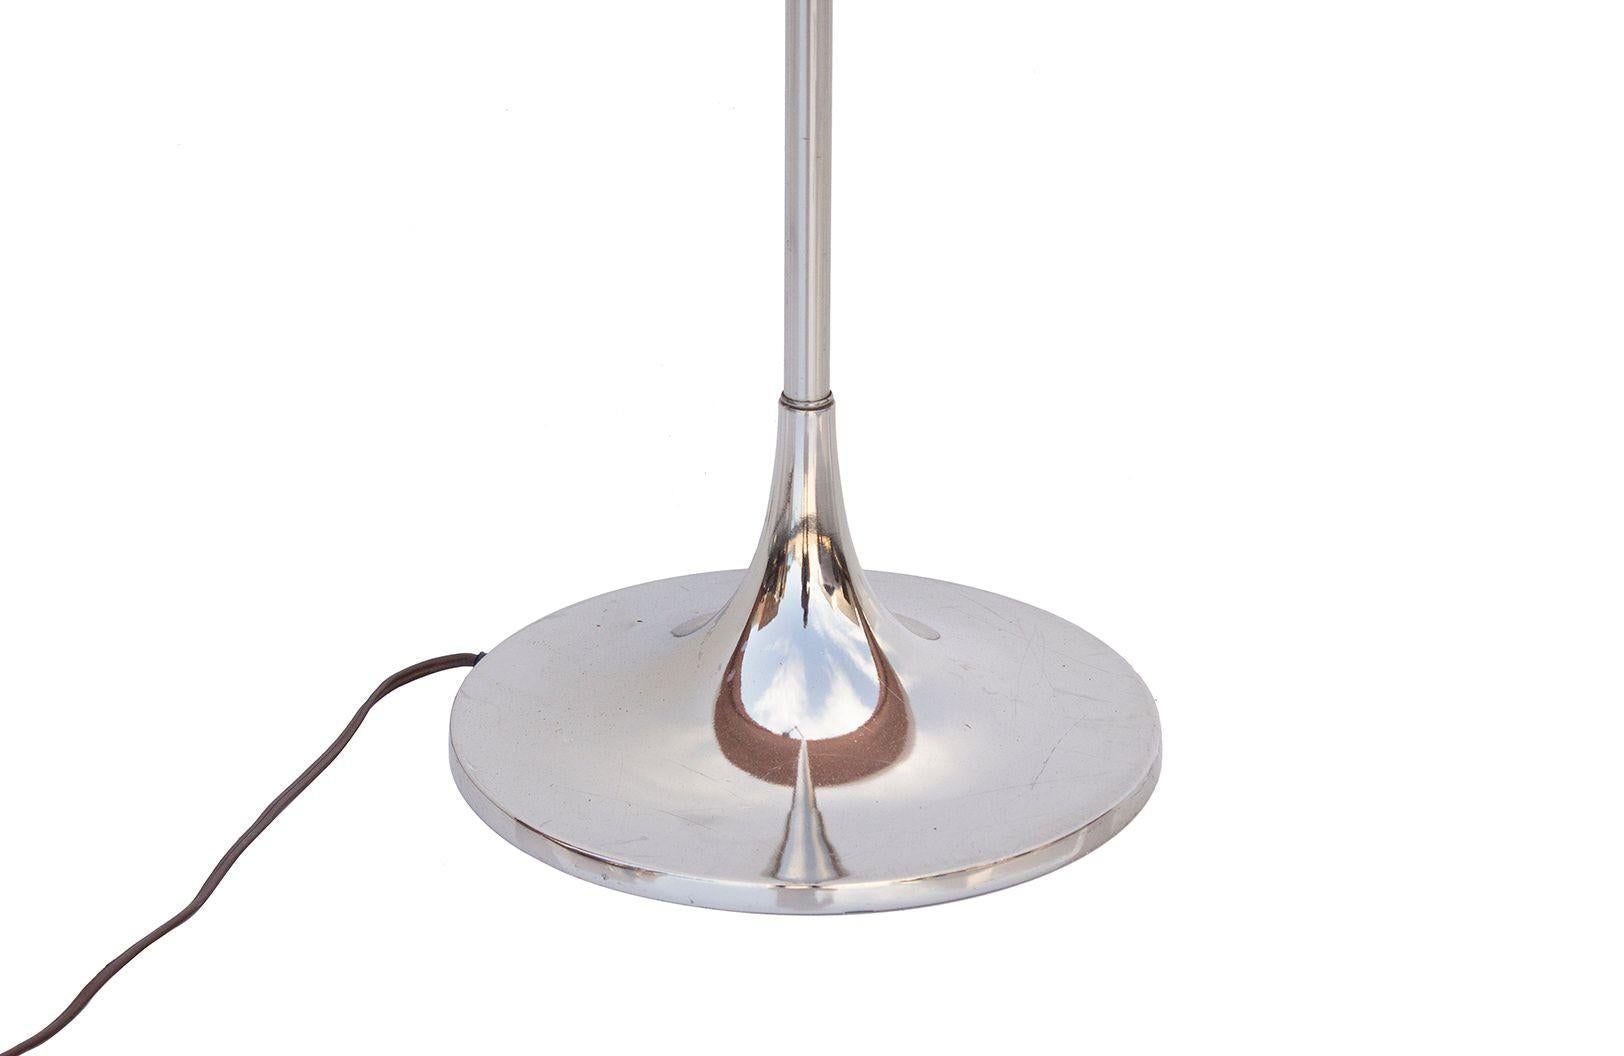 USA, 1960s
Chrome swing arm tulip floor lamp by Laurel Lamp Co. Signed LLC on the underside of the weighted base. Versatile floor lamp with adjustable swing arm. 
CONDITION NOTES: Original wiring is in working condition. Light age appropriate marks.